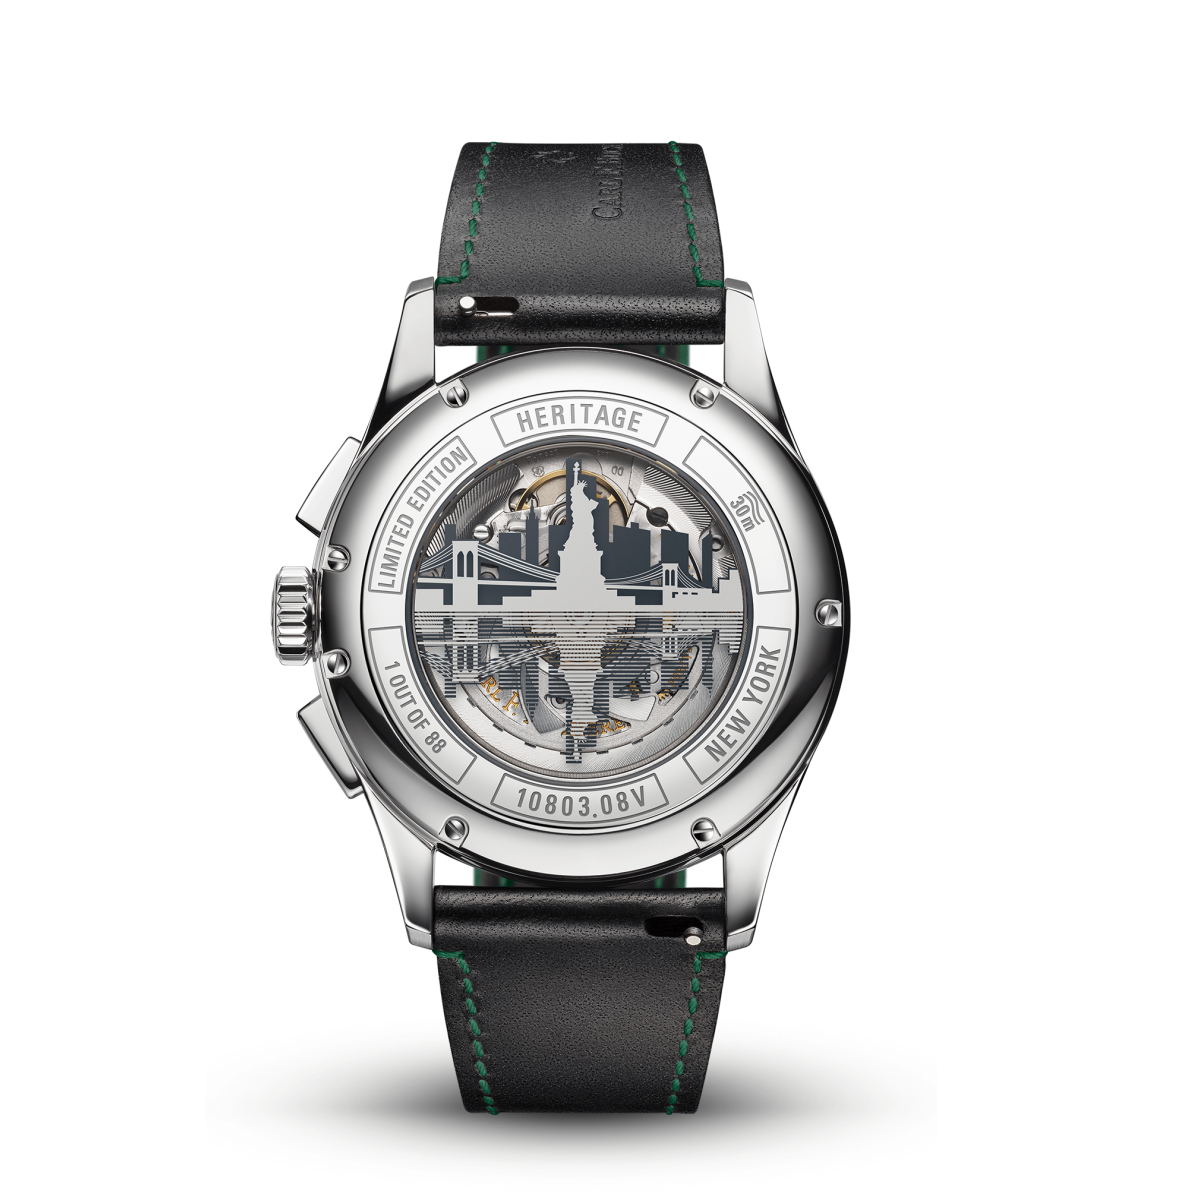 Carl F. Bucherer Haritage Chronograph Stainless steel Limited Edition Men's Watch